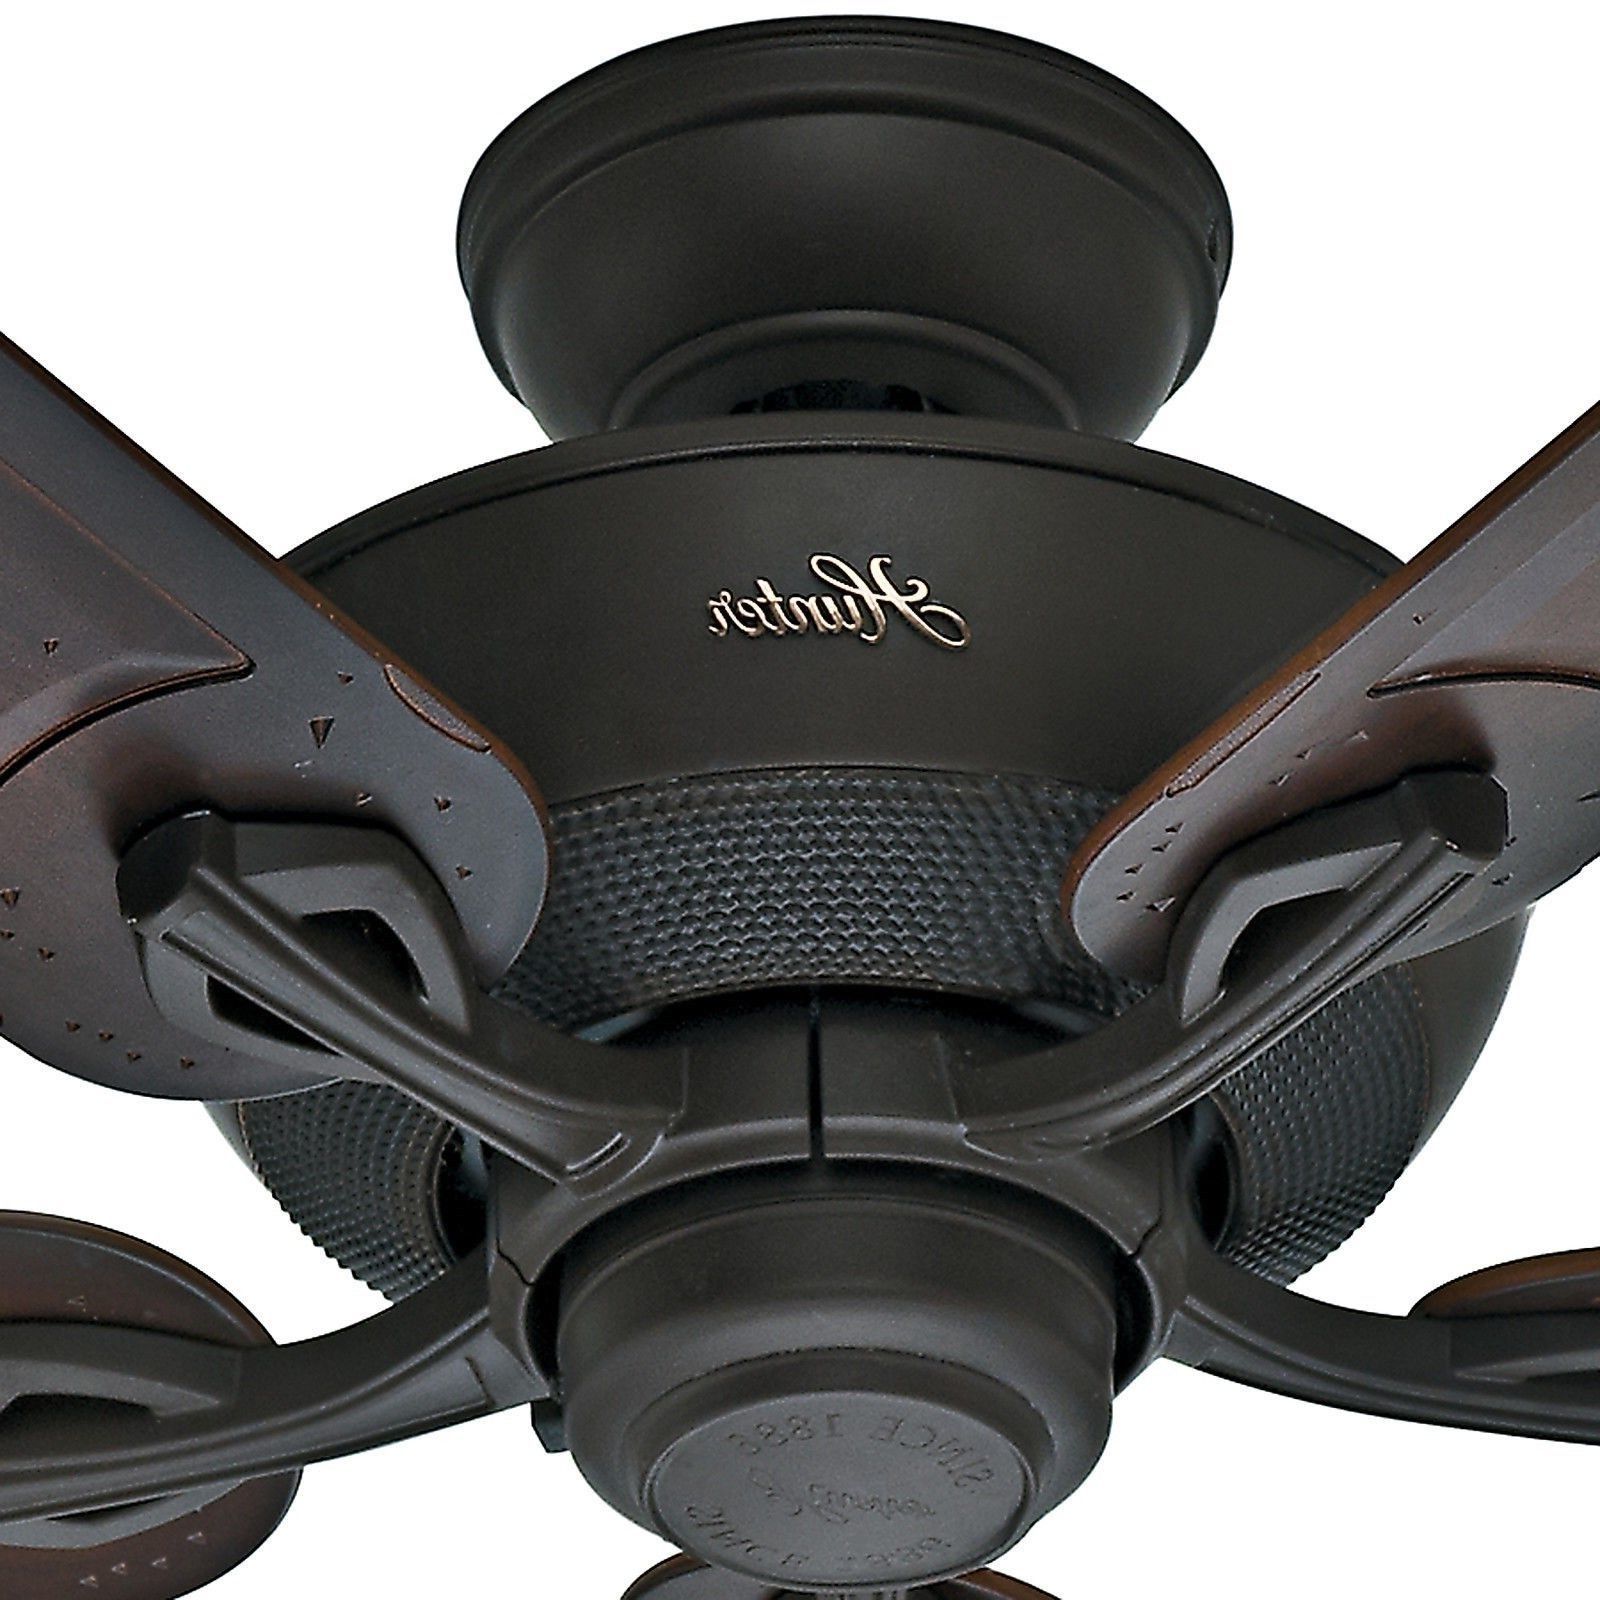 Most Recently Released Energy Star Outdoor Ceiling Fans With Light In Black Outdoor Ceiling Fans Lighting And Ceiling Fans, Black Outdoor (View 10 of 20)